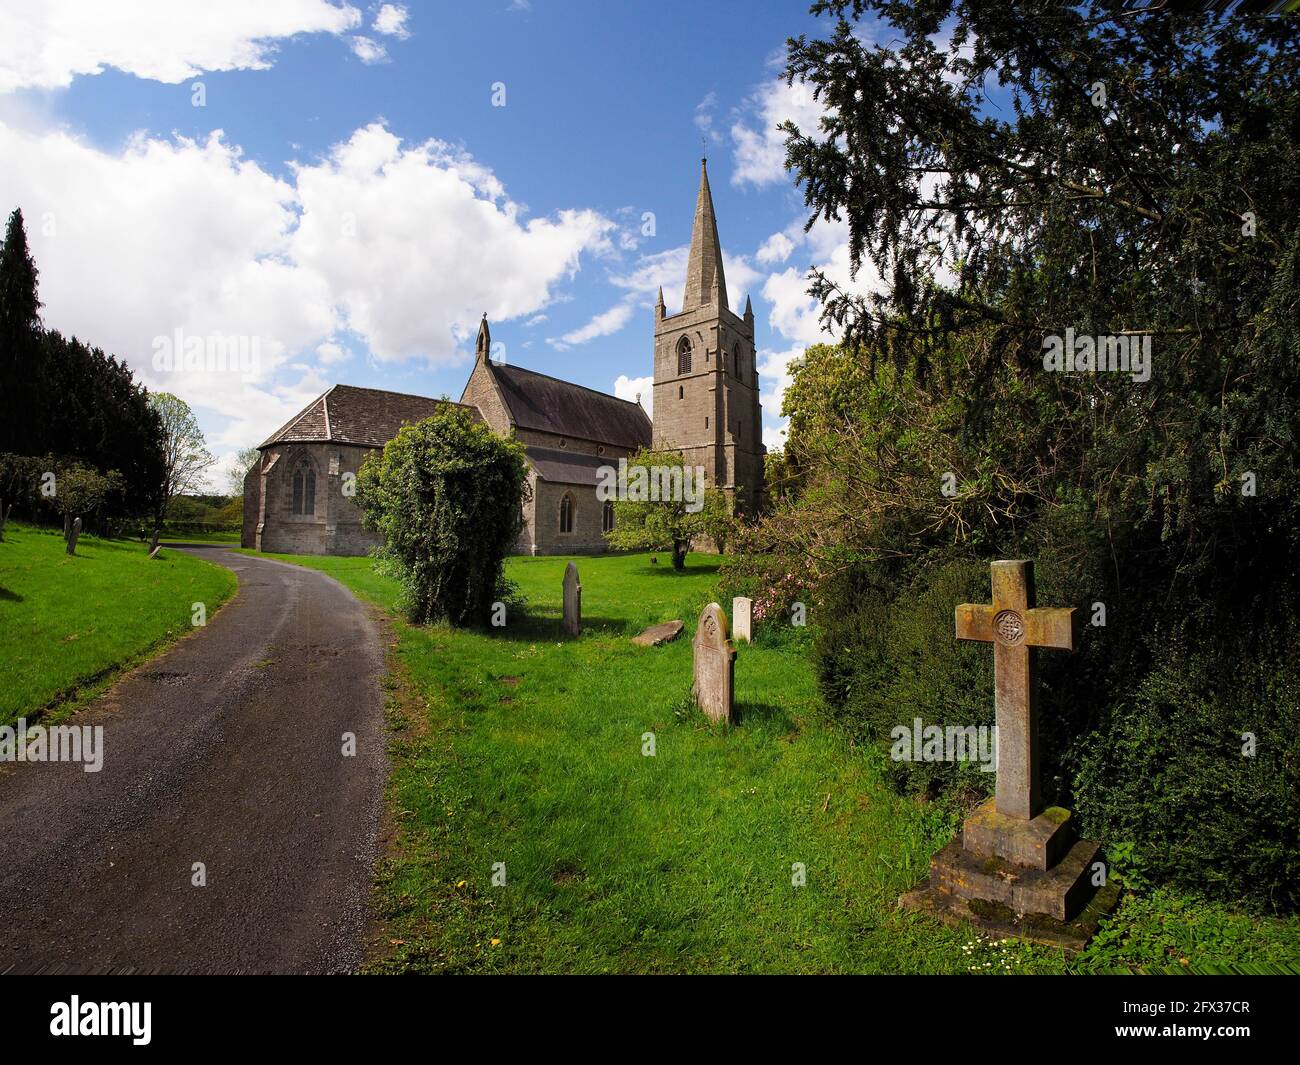 The historic church of St Mary the Virgin, Marden is a Grade 1 listed building, peaceful and rural on the banks of the River Lugg. Stock Photo